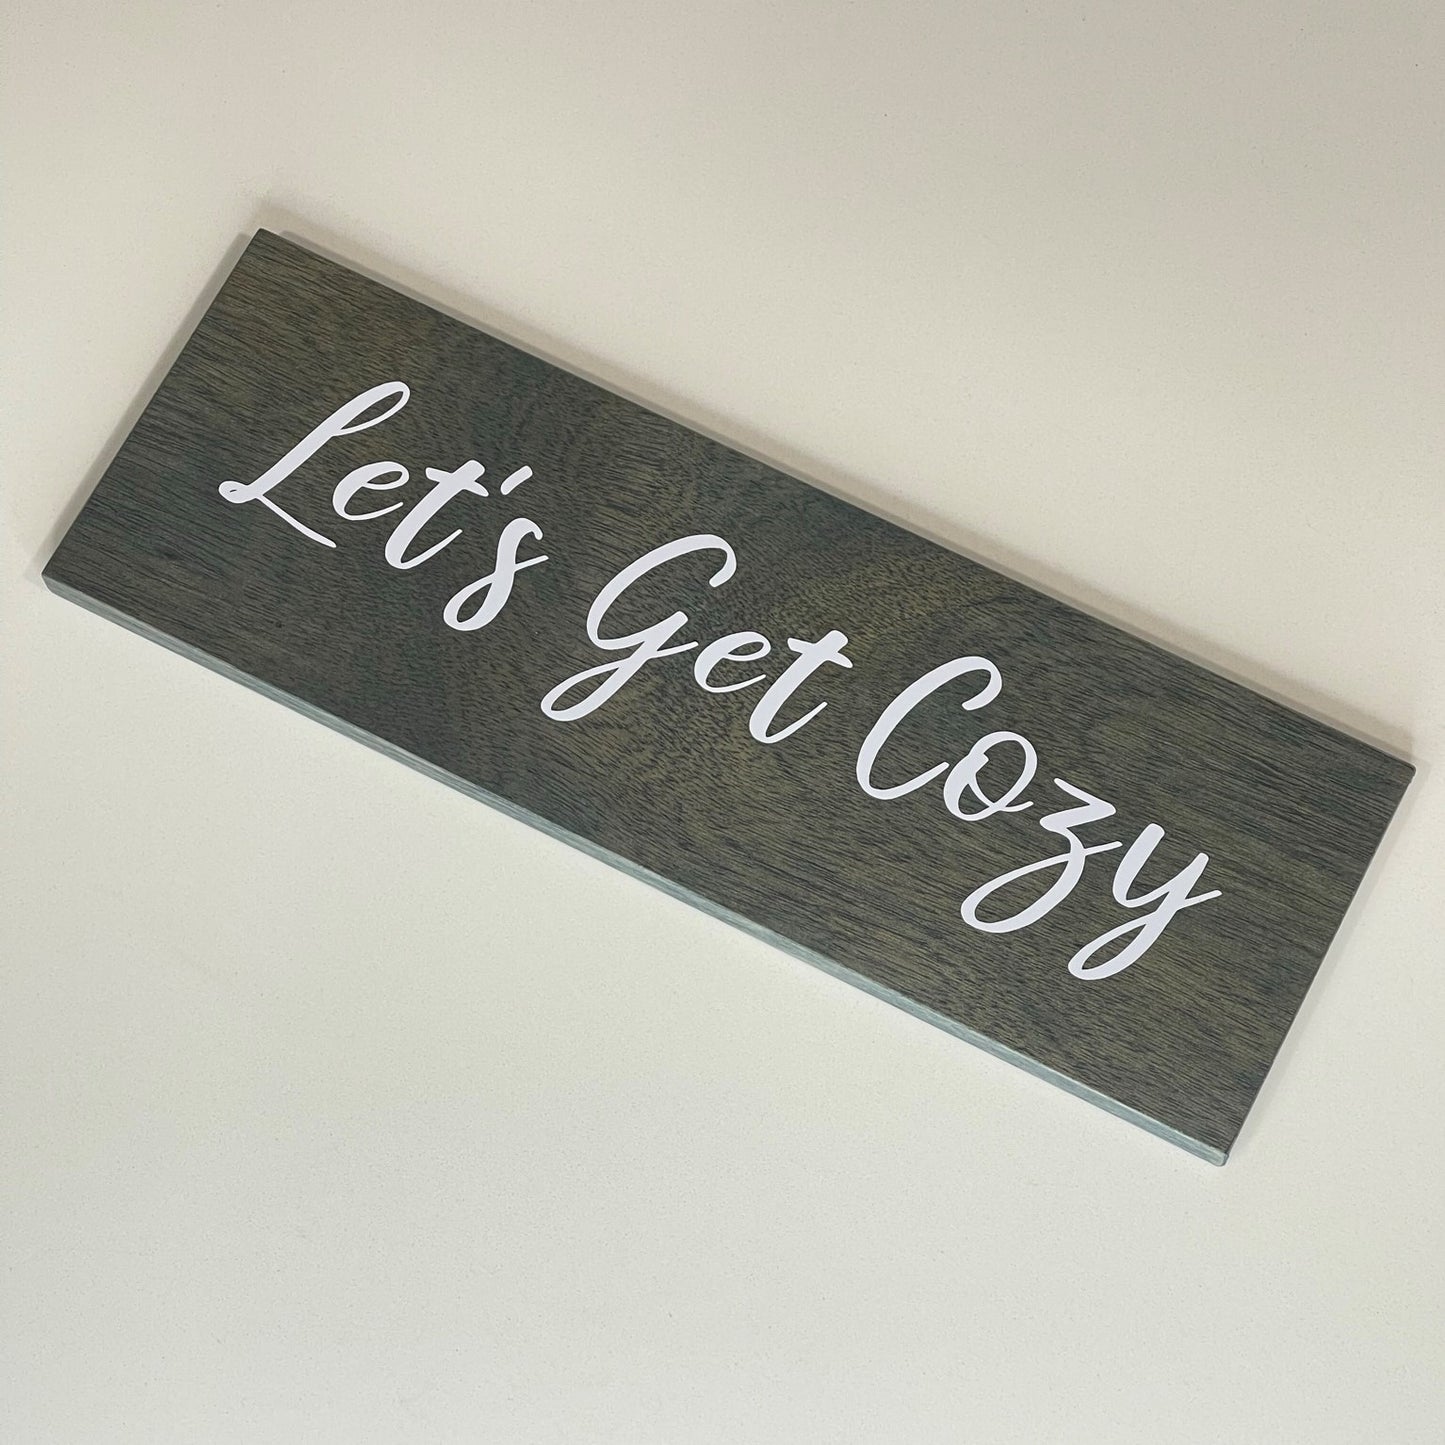 Let's Get Cozy - Funny Sign - Wall Decor - Bar Wall Art - Wooden Sign